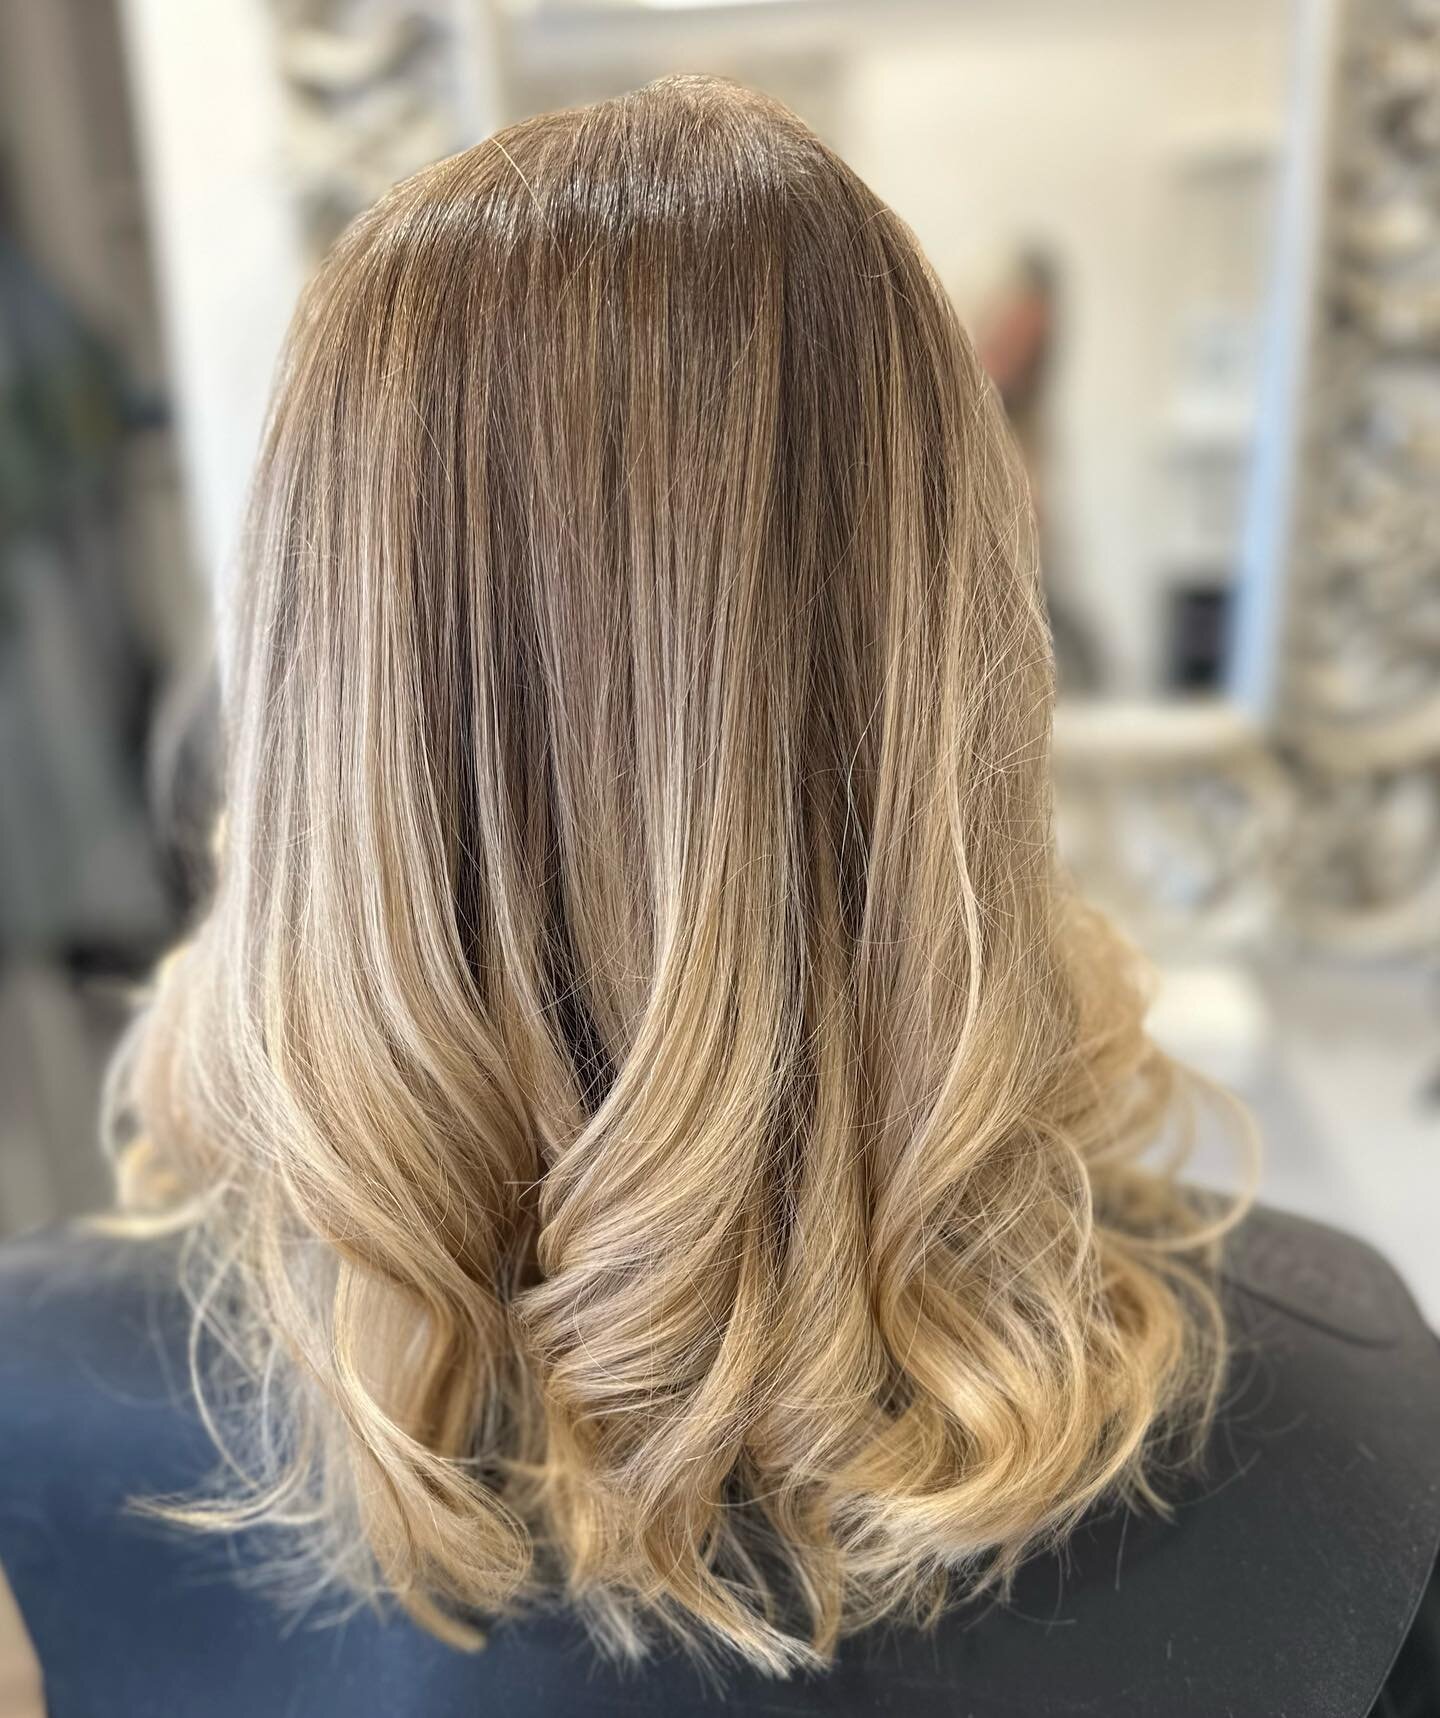 Beautiful root melt for our guest, using our fabulous Paul Mitchell colour range.

Products used : @paulmitchell&nbsp;@paulmitchelluk @xgcolour #olaplex

⏰ &nbsp;Please be aware that any new colour clients require an essential skin test minimum 48 ho